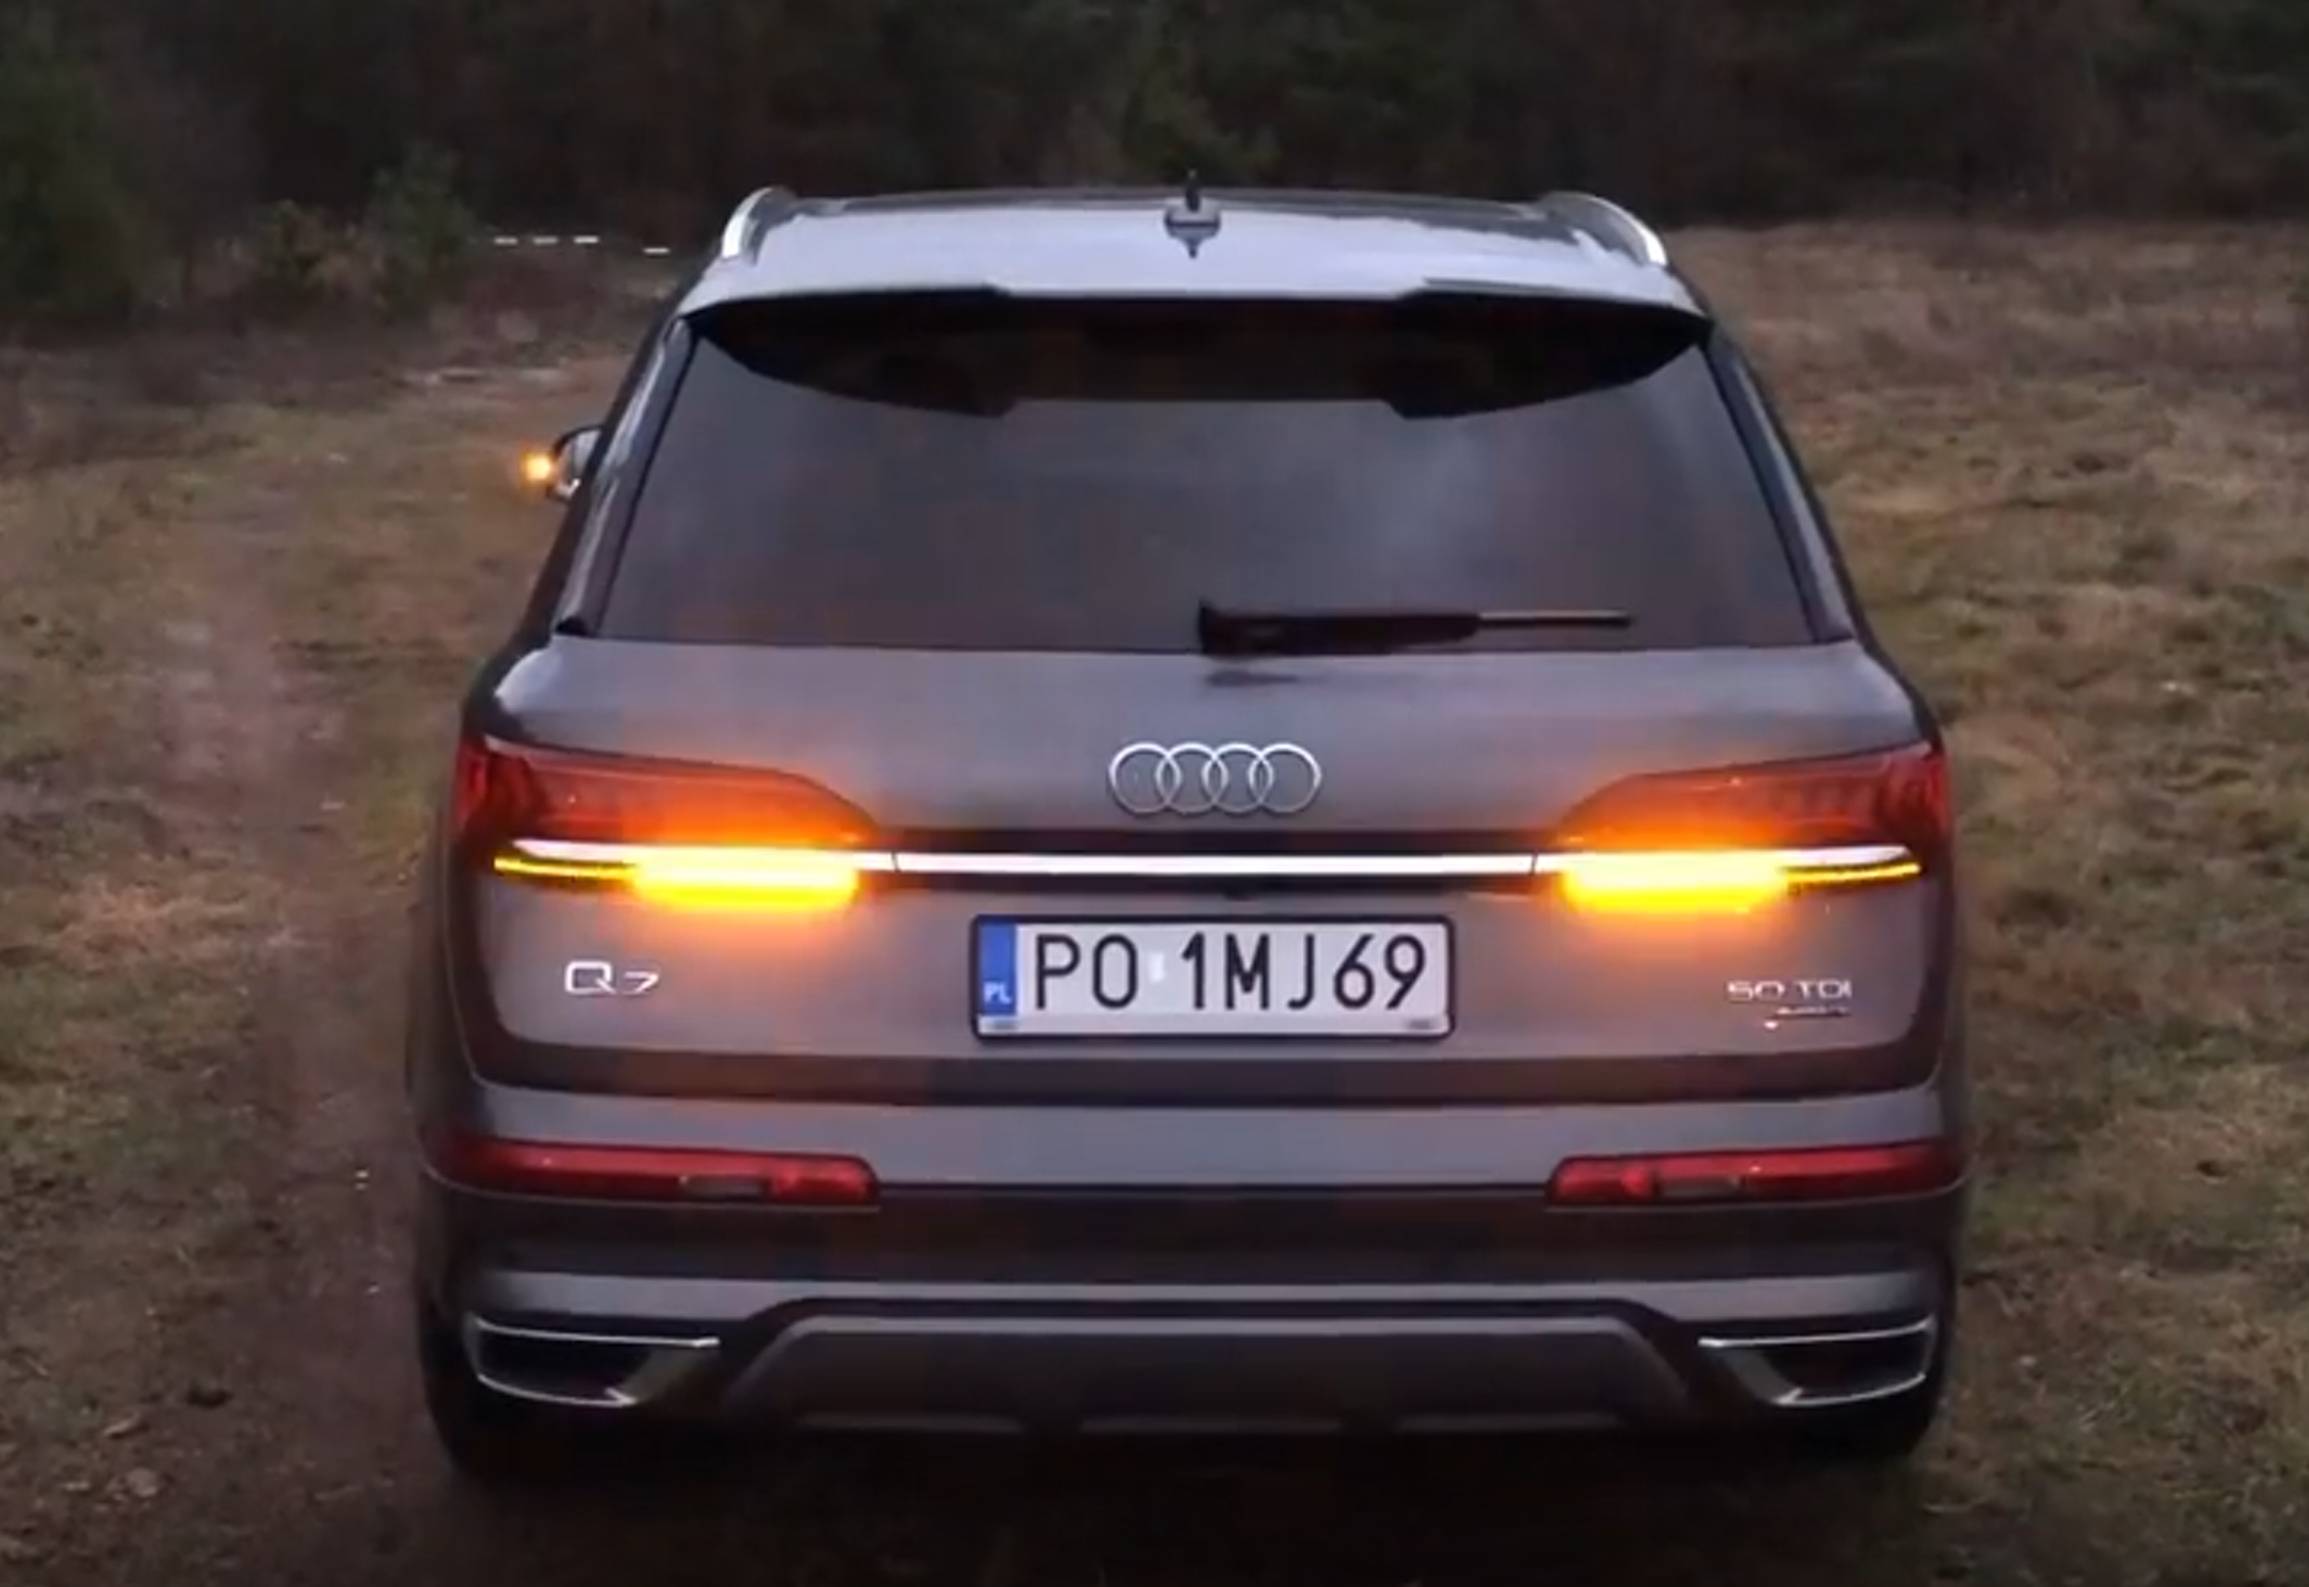 New Audi Q7 dynamic rear and front lights